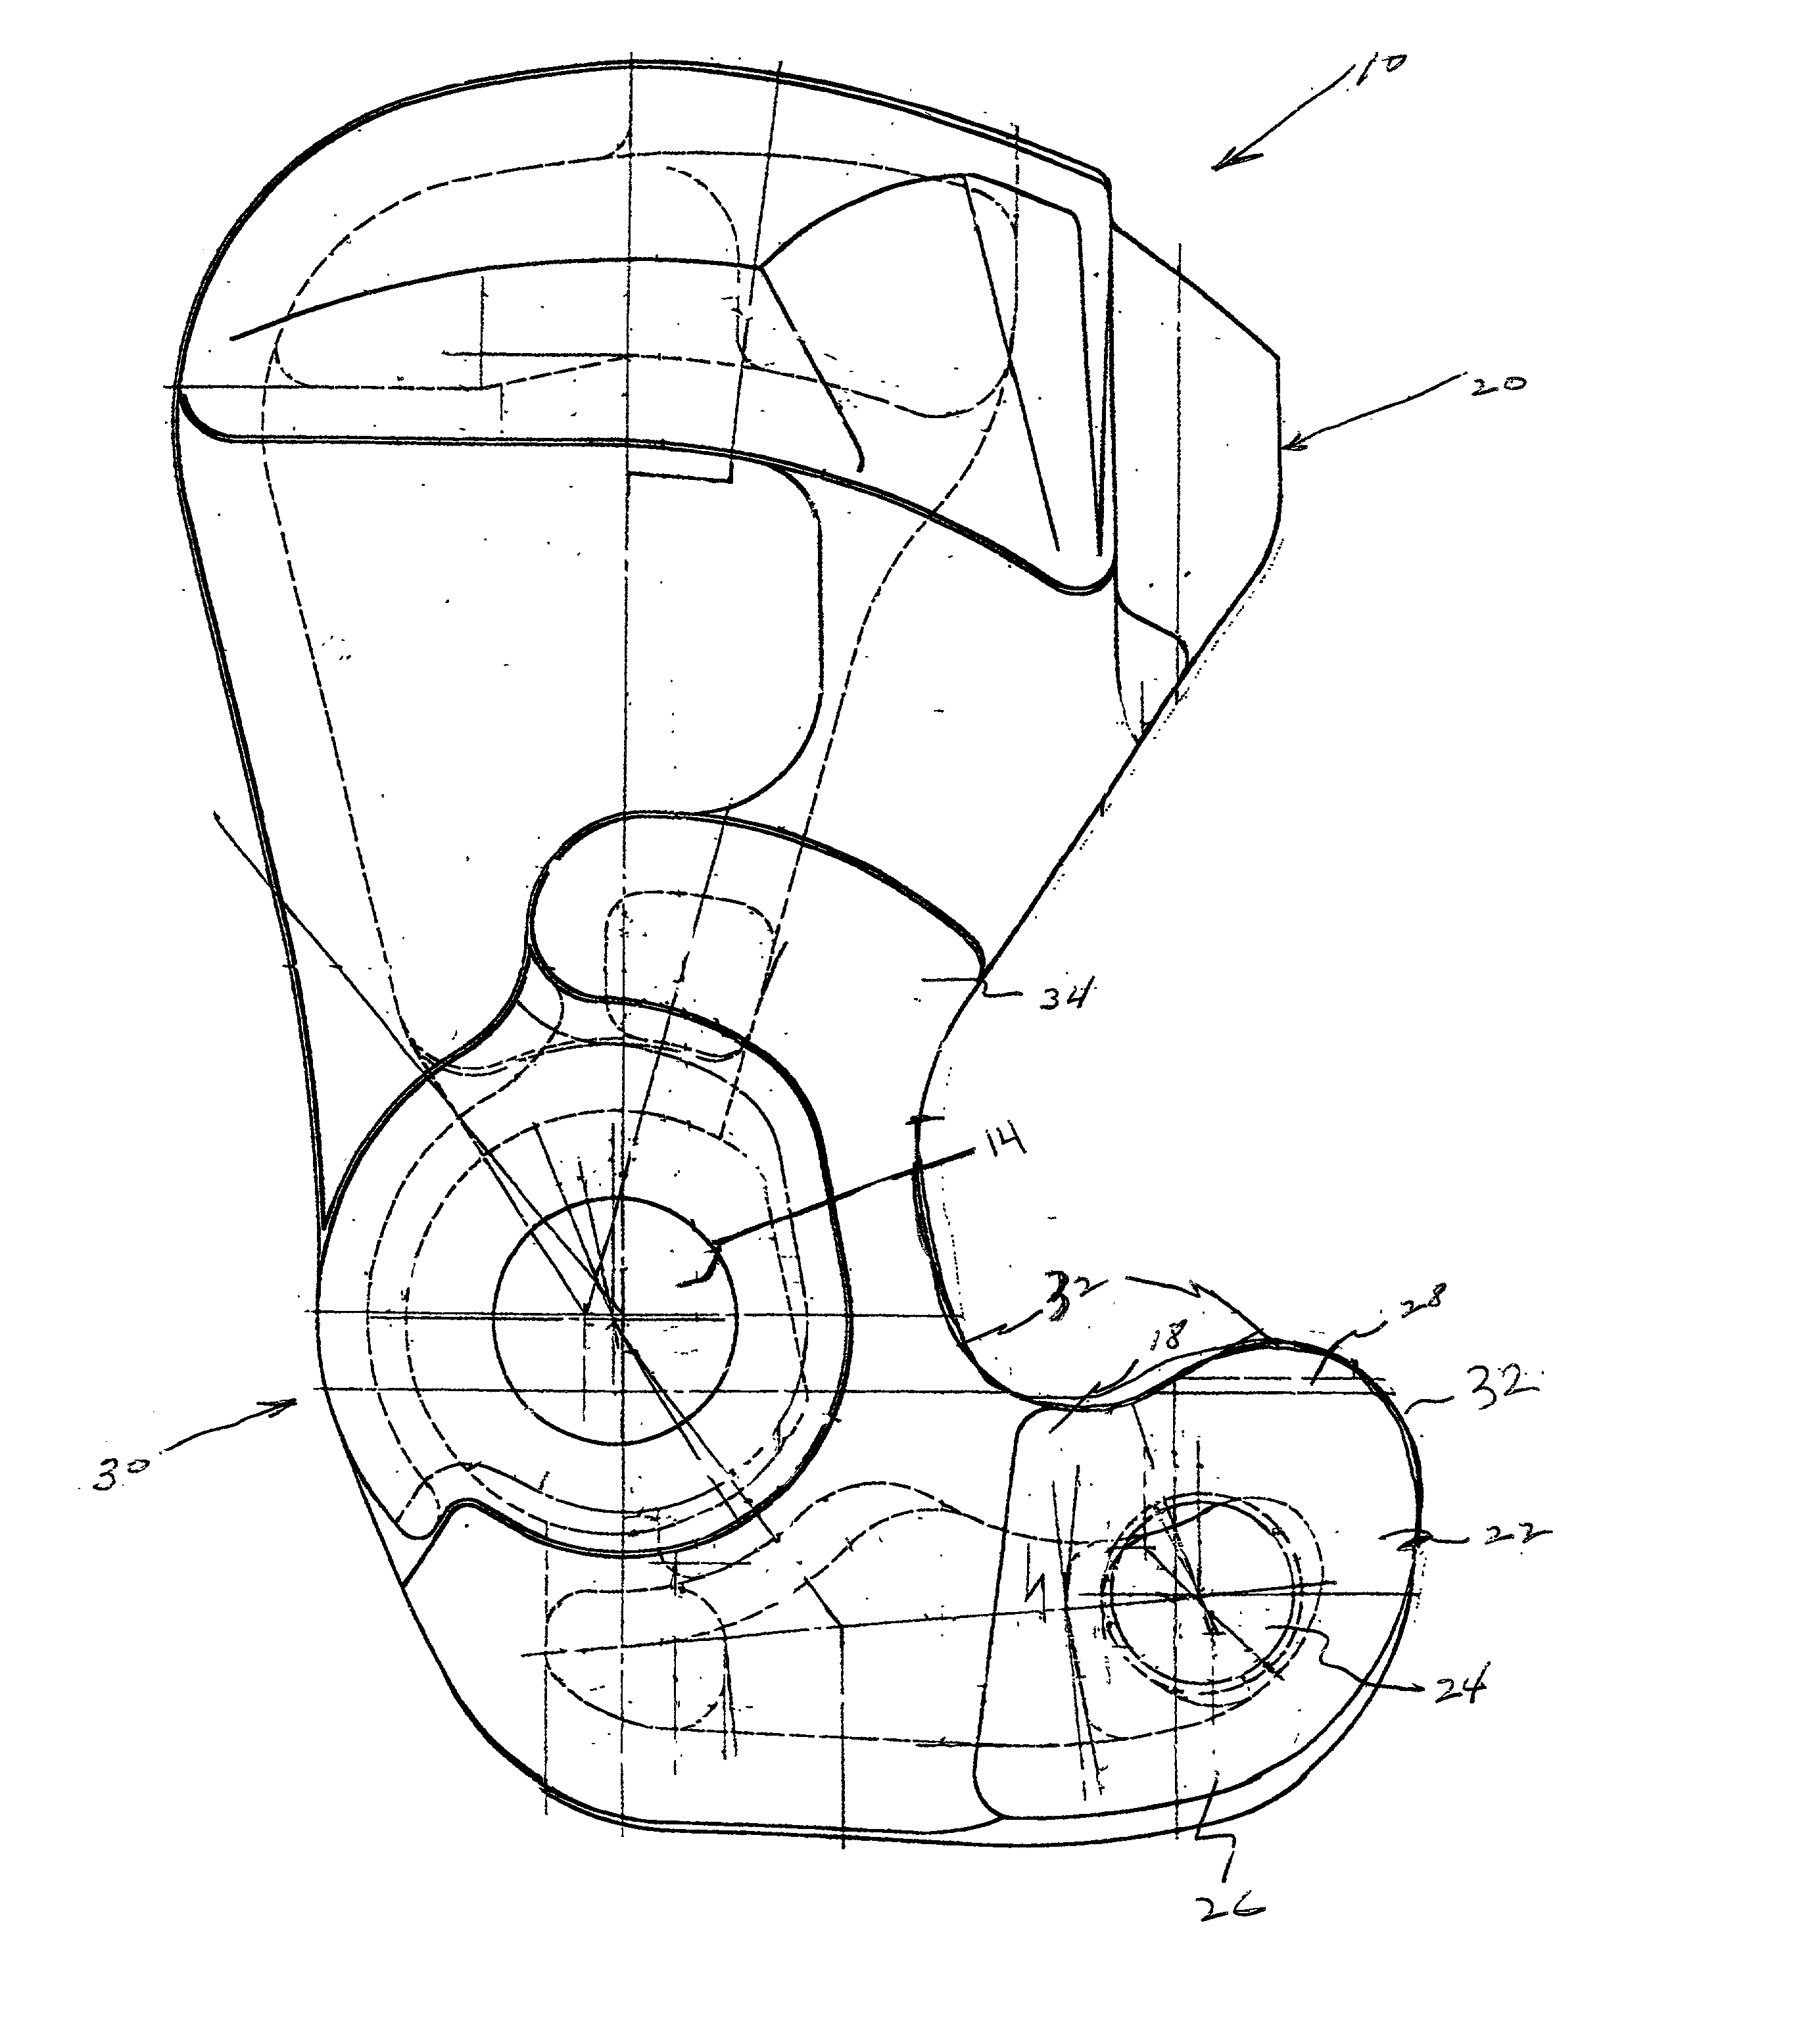 Railway car coupler knuckle having improved bearing surface